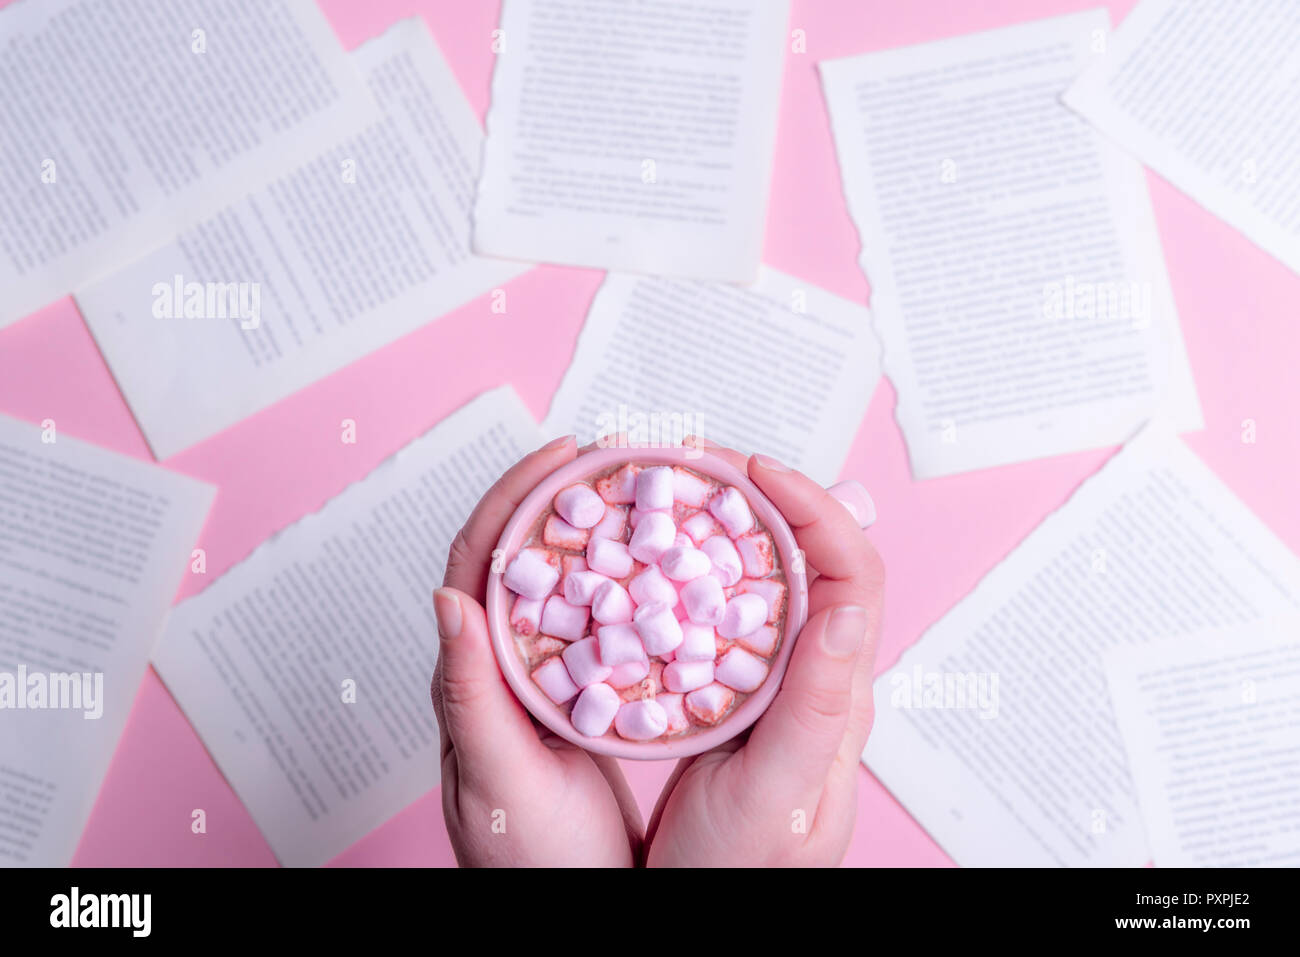 Woman holding, with both hands, a pink cup of hot chocolate with pink mini marshmallows, above a table full of book pages. Stock Photo